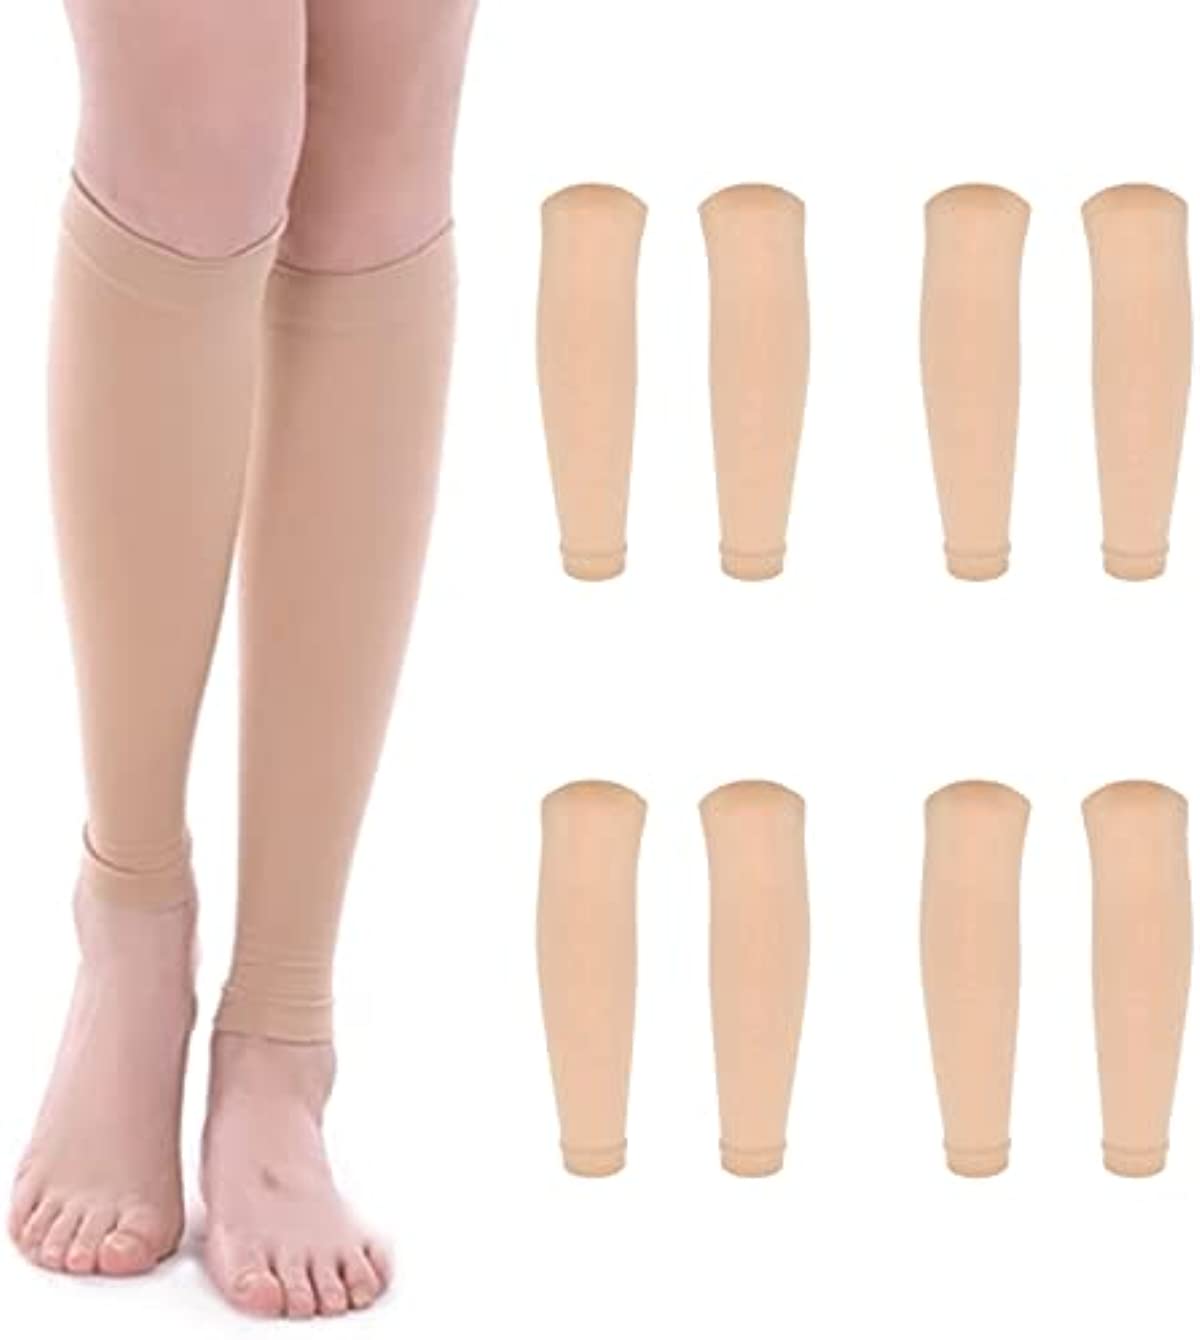 ATENTO 4 Pairs Calf Compression Sleeves for Women & Men - Wide Leg Footless Sleeve Compression Socks for Fitness -Support and Relief for Shin Splints, Varicose Veins, Sore Muscles + Joints, Strains (Medium, Nude)